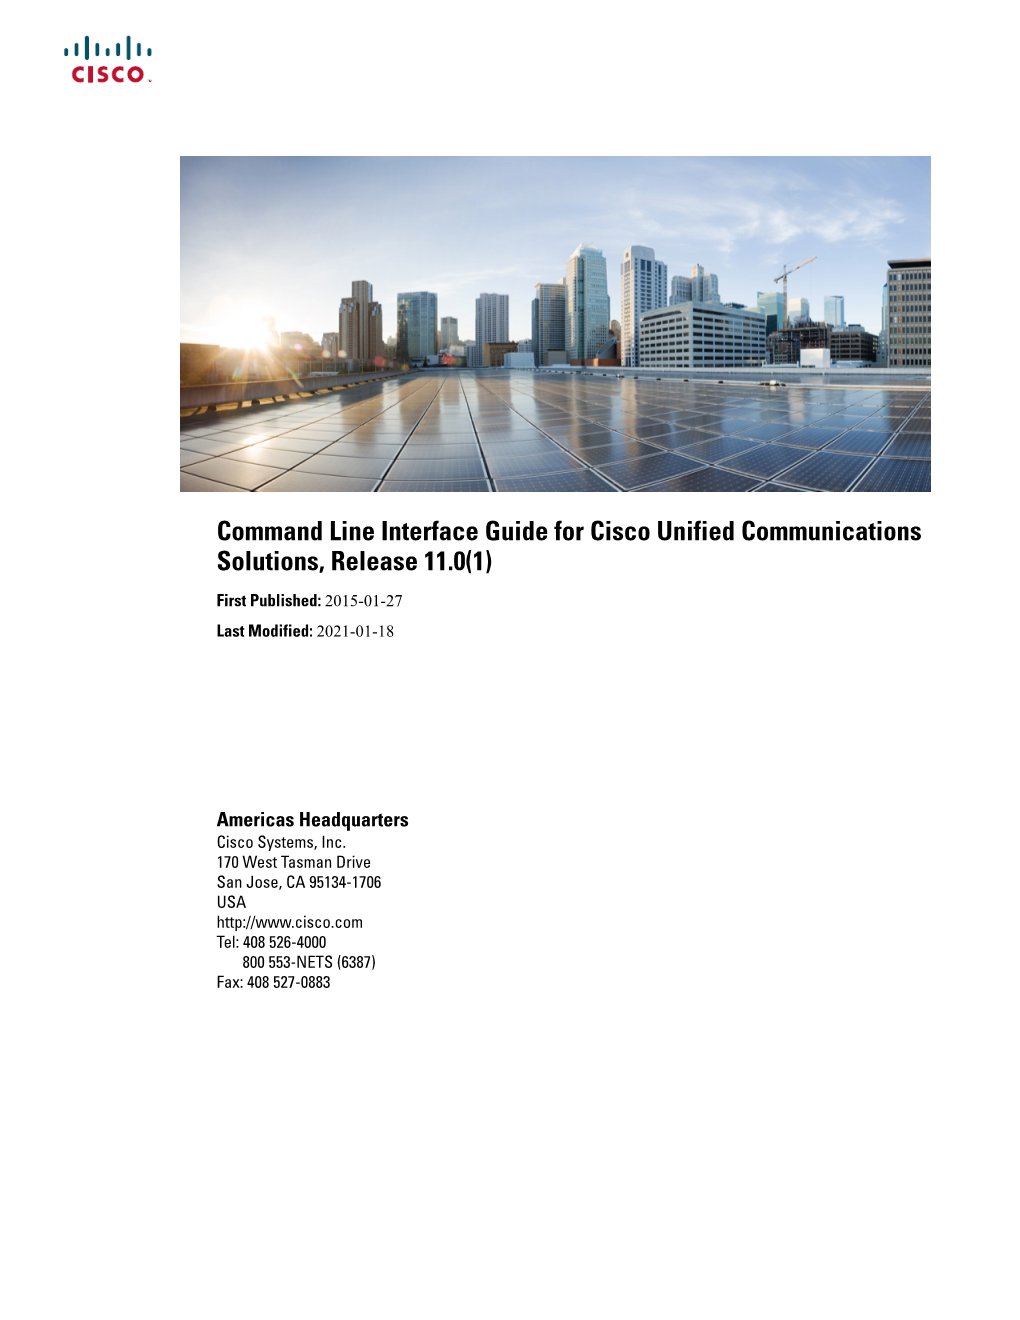 Command Line Interface Guide for Cisco Unified Communications Solutions, Release 11.0(1)